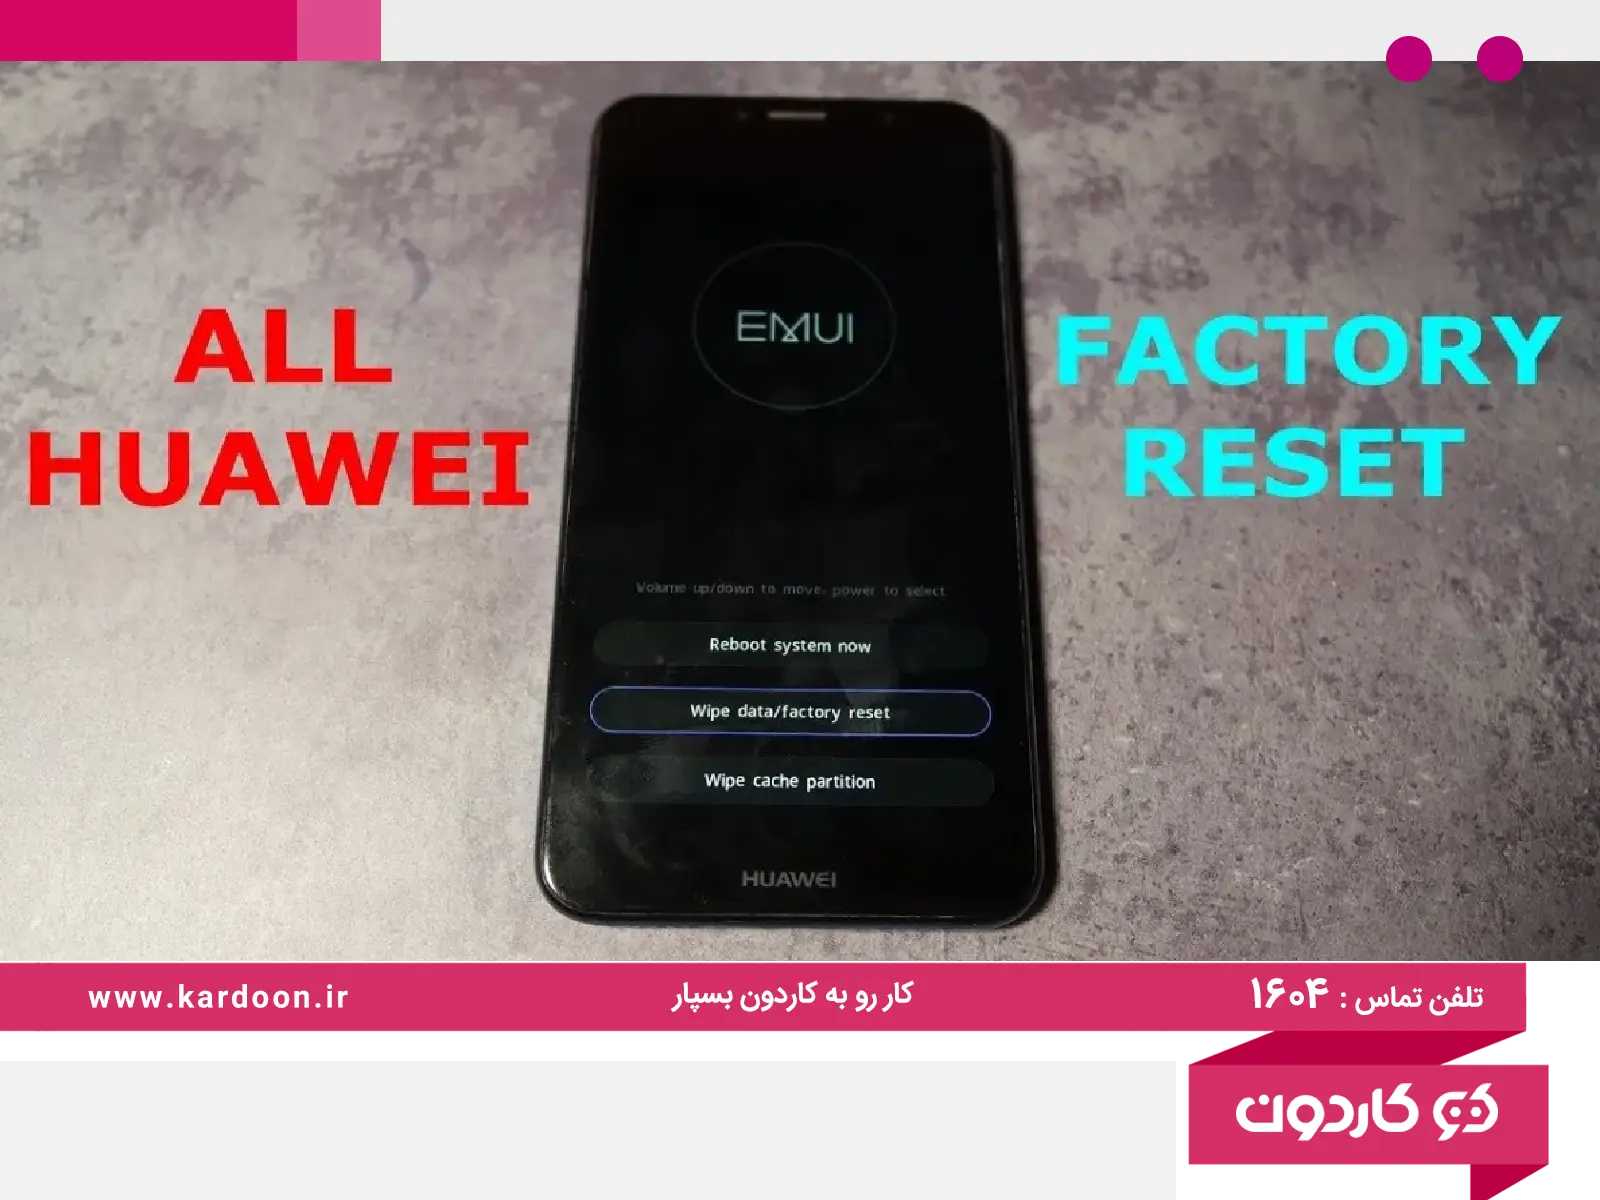 3 great ways to factory reset a Huawei phone